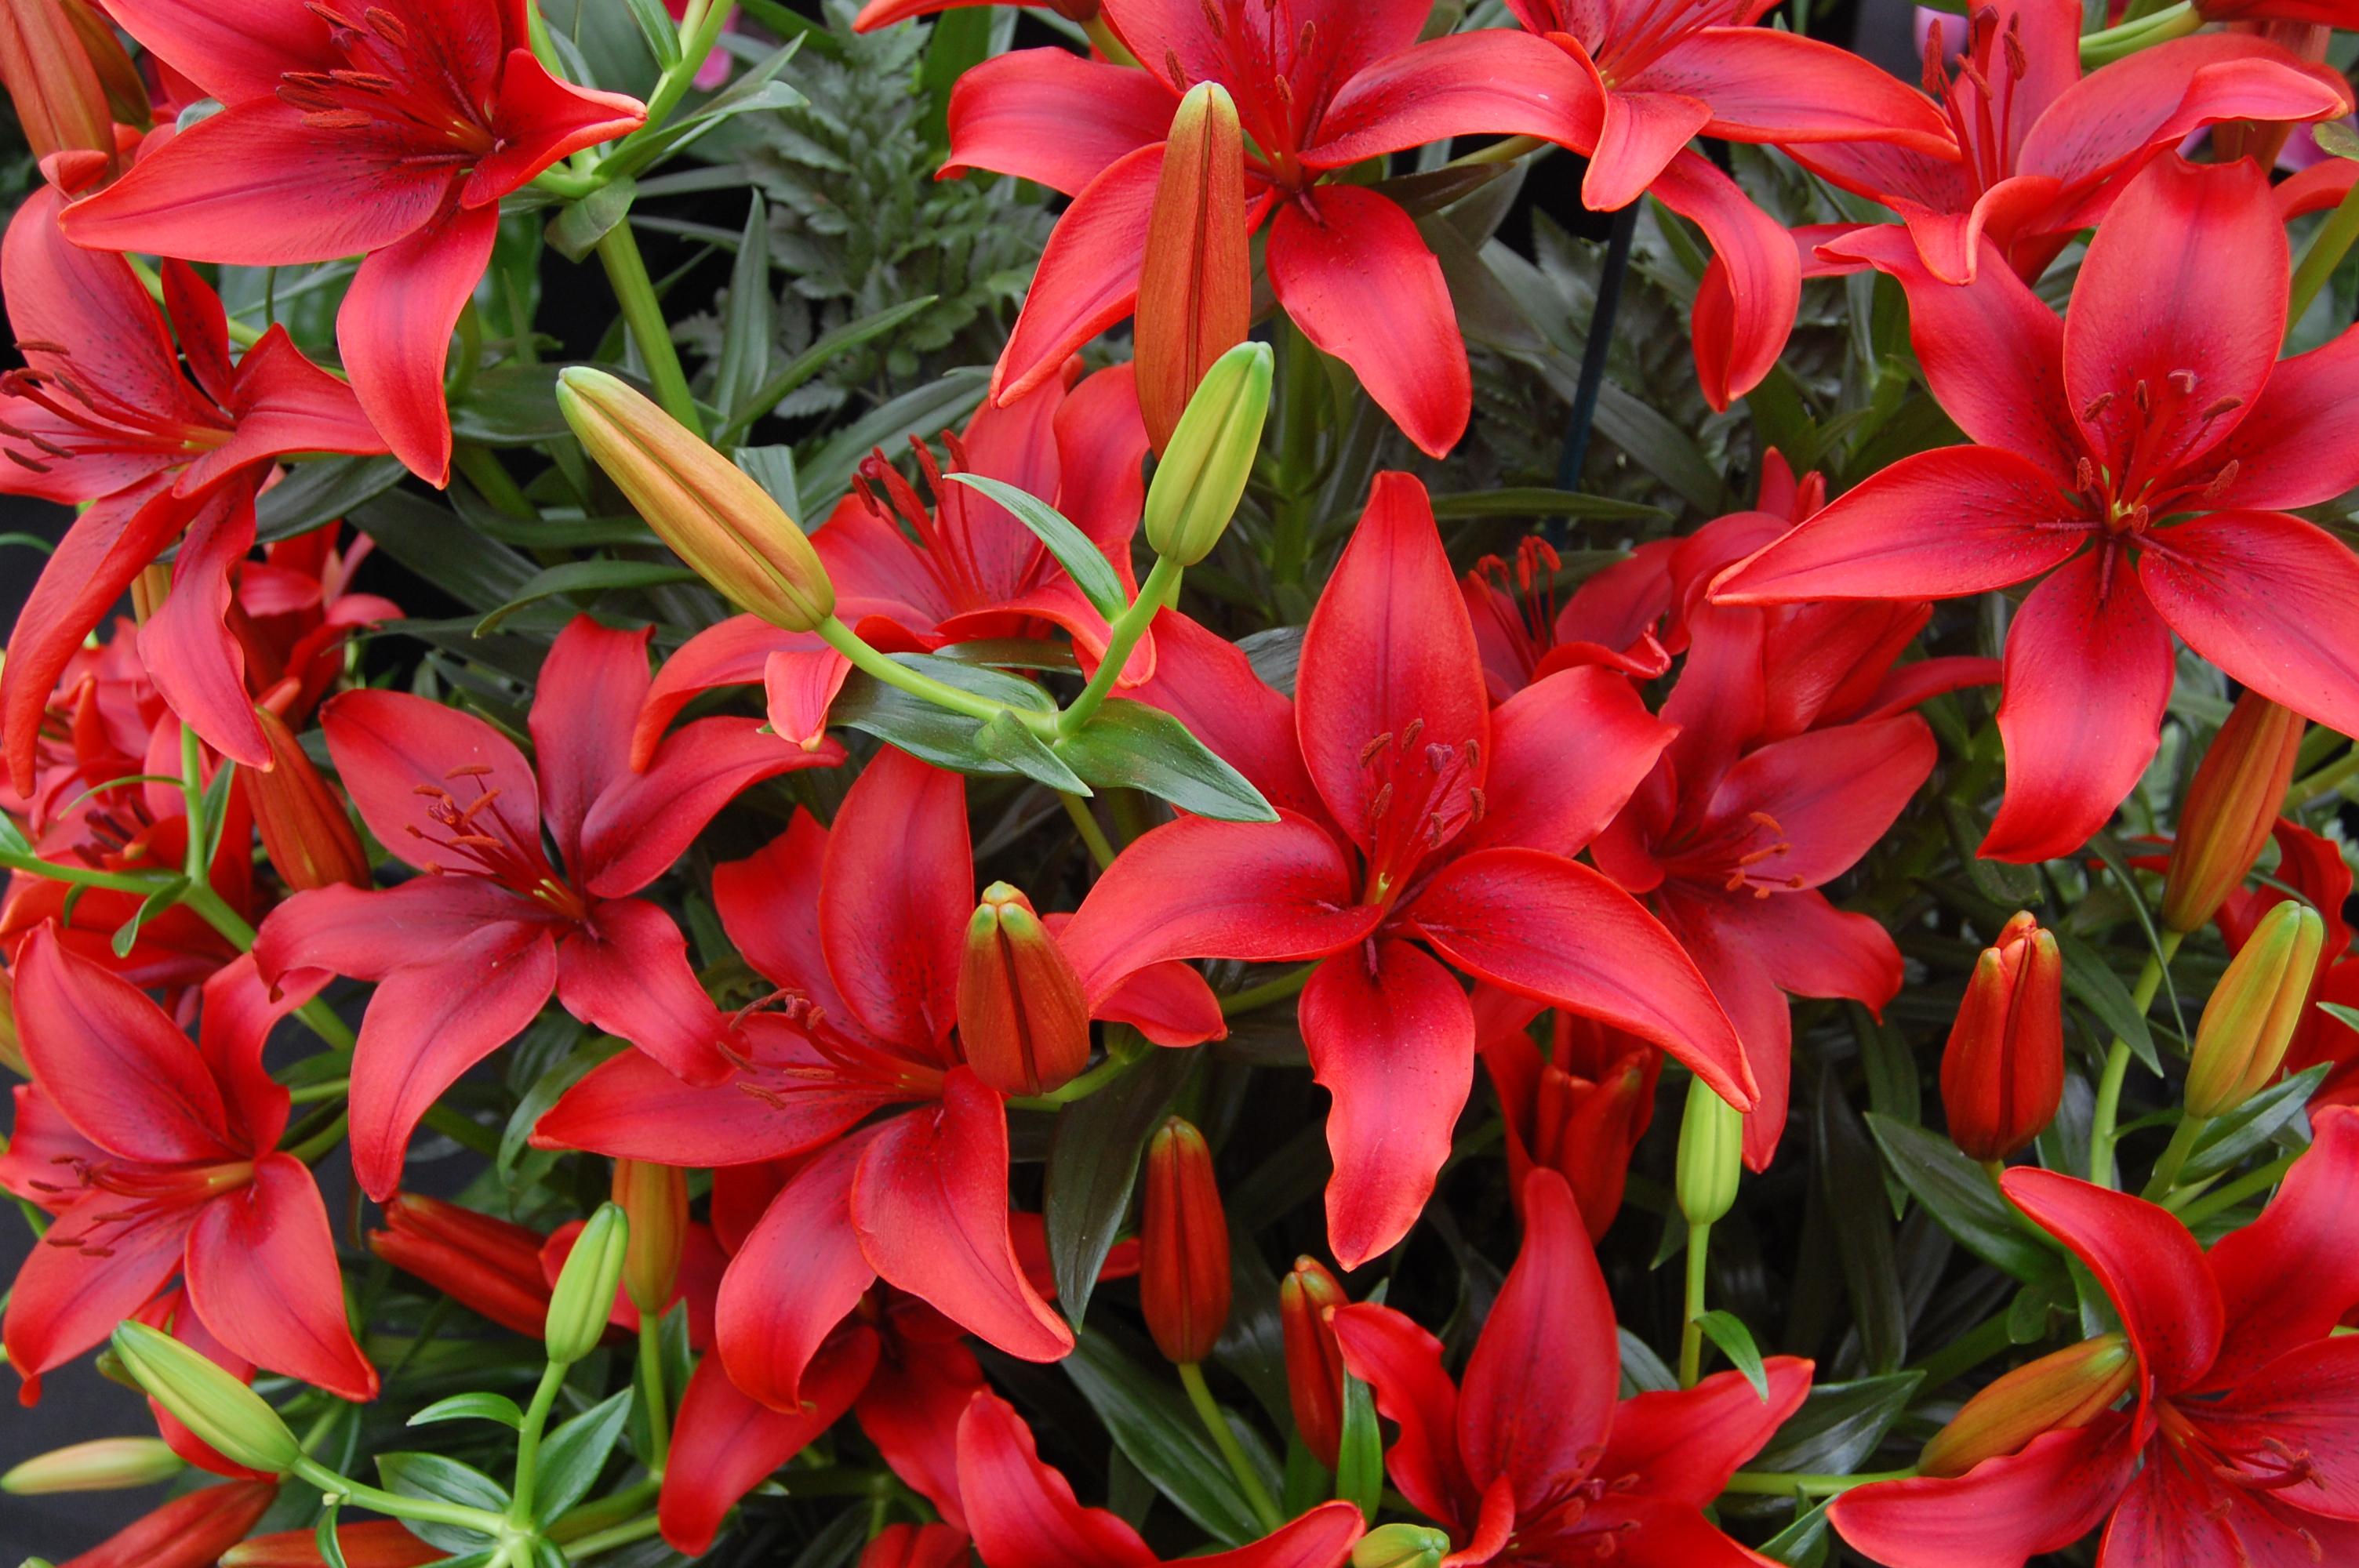 Red flower with stigma, style, red stamen, green leaves, lime-green buds and stems.